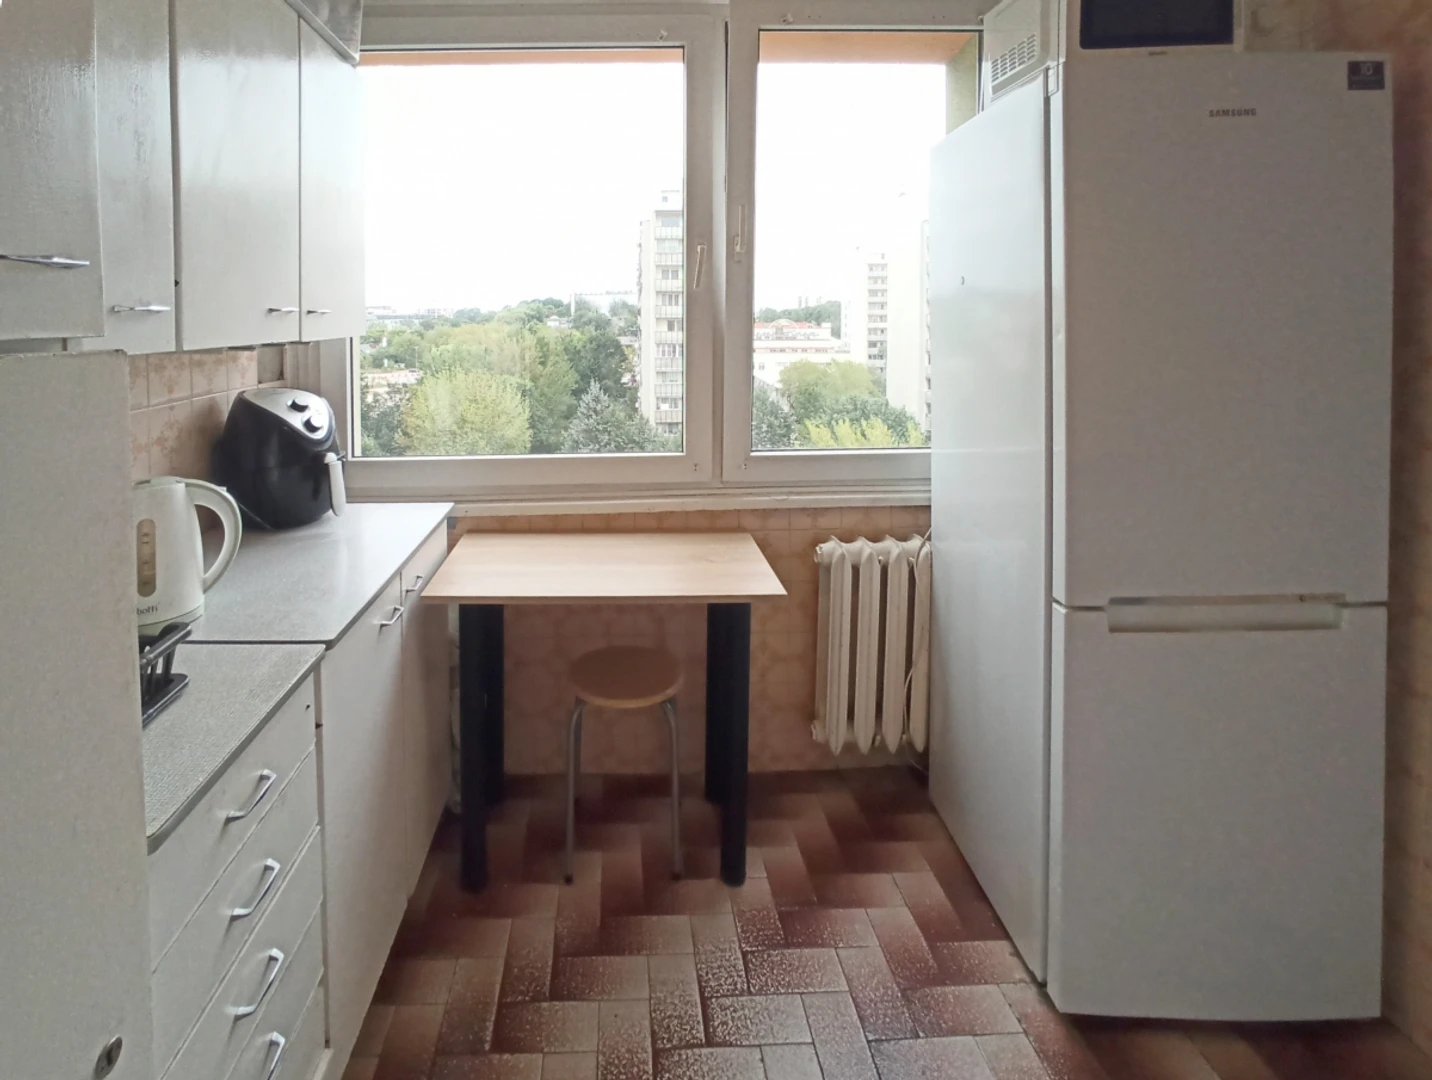 Renting rooms by the month in Białystok